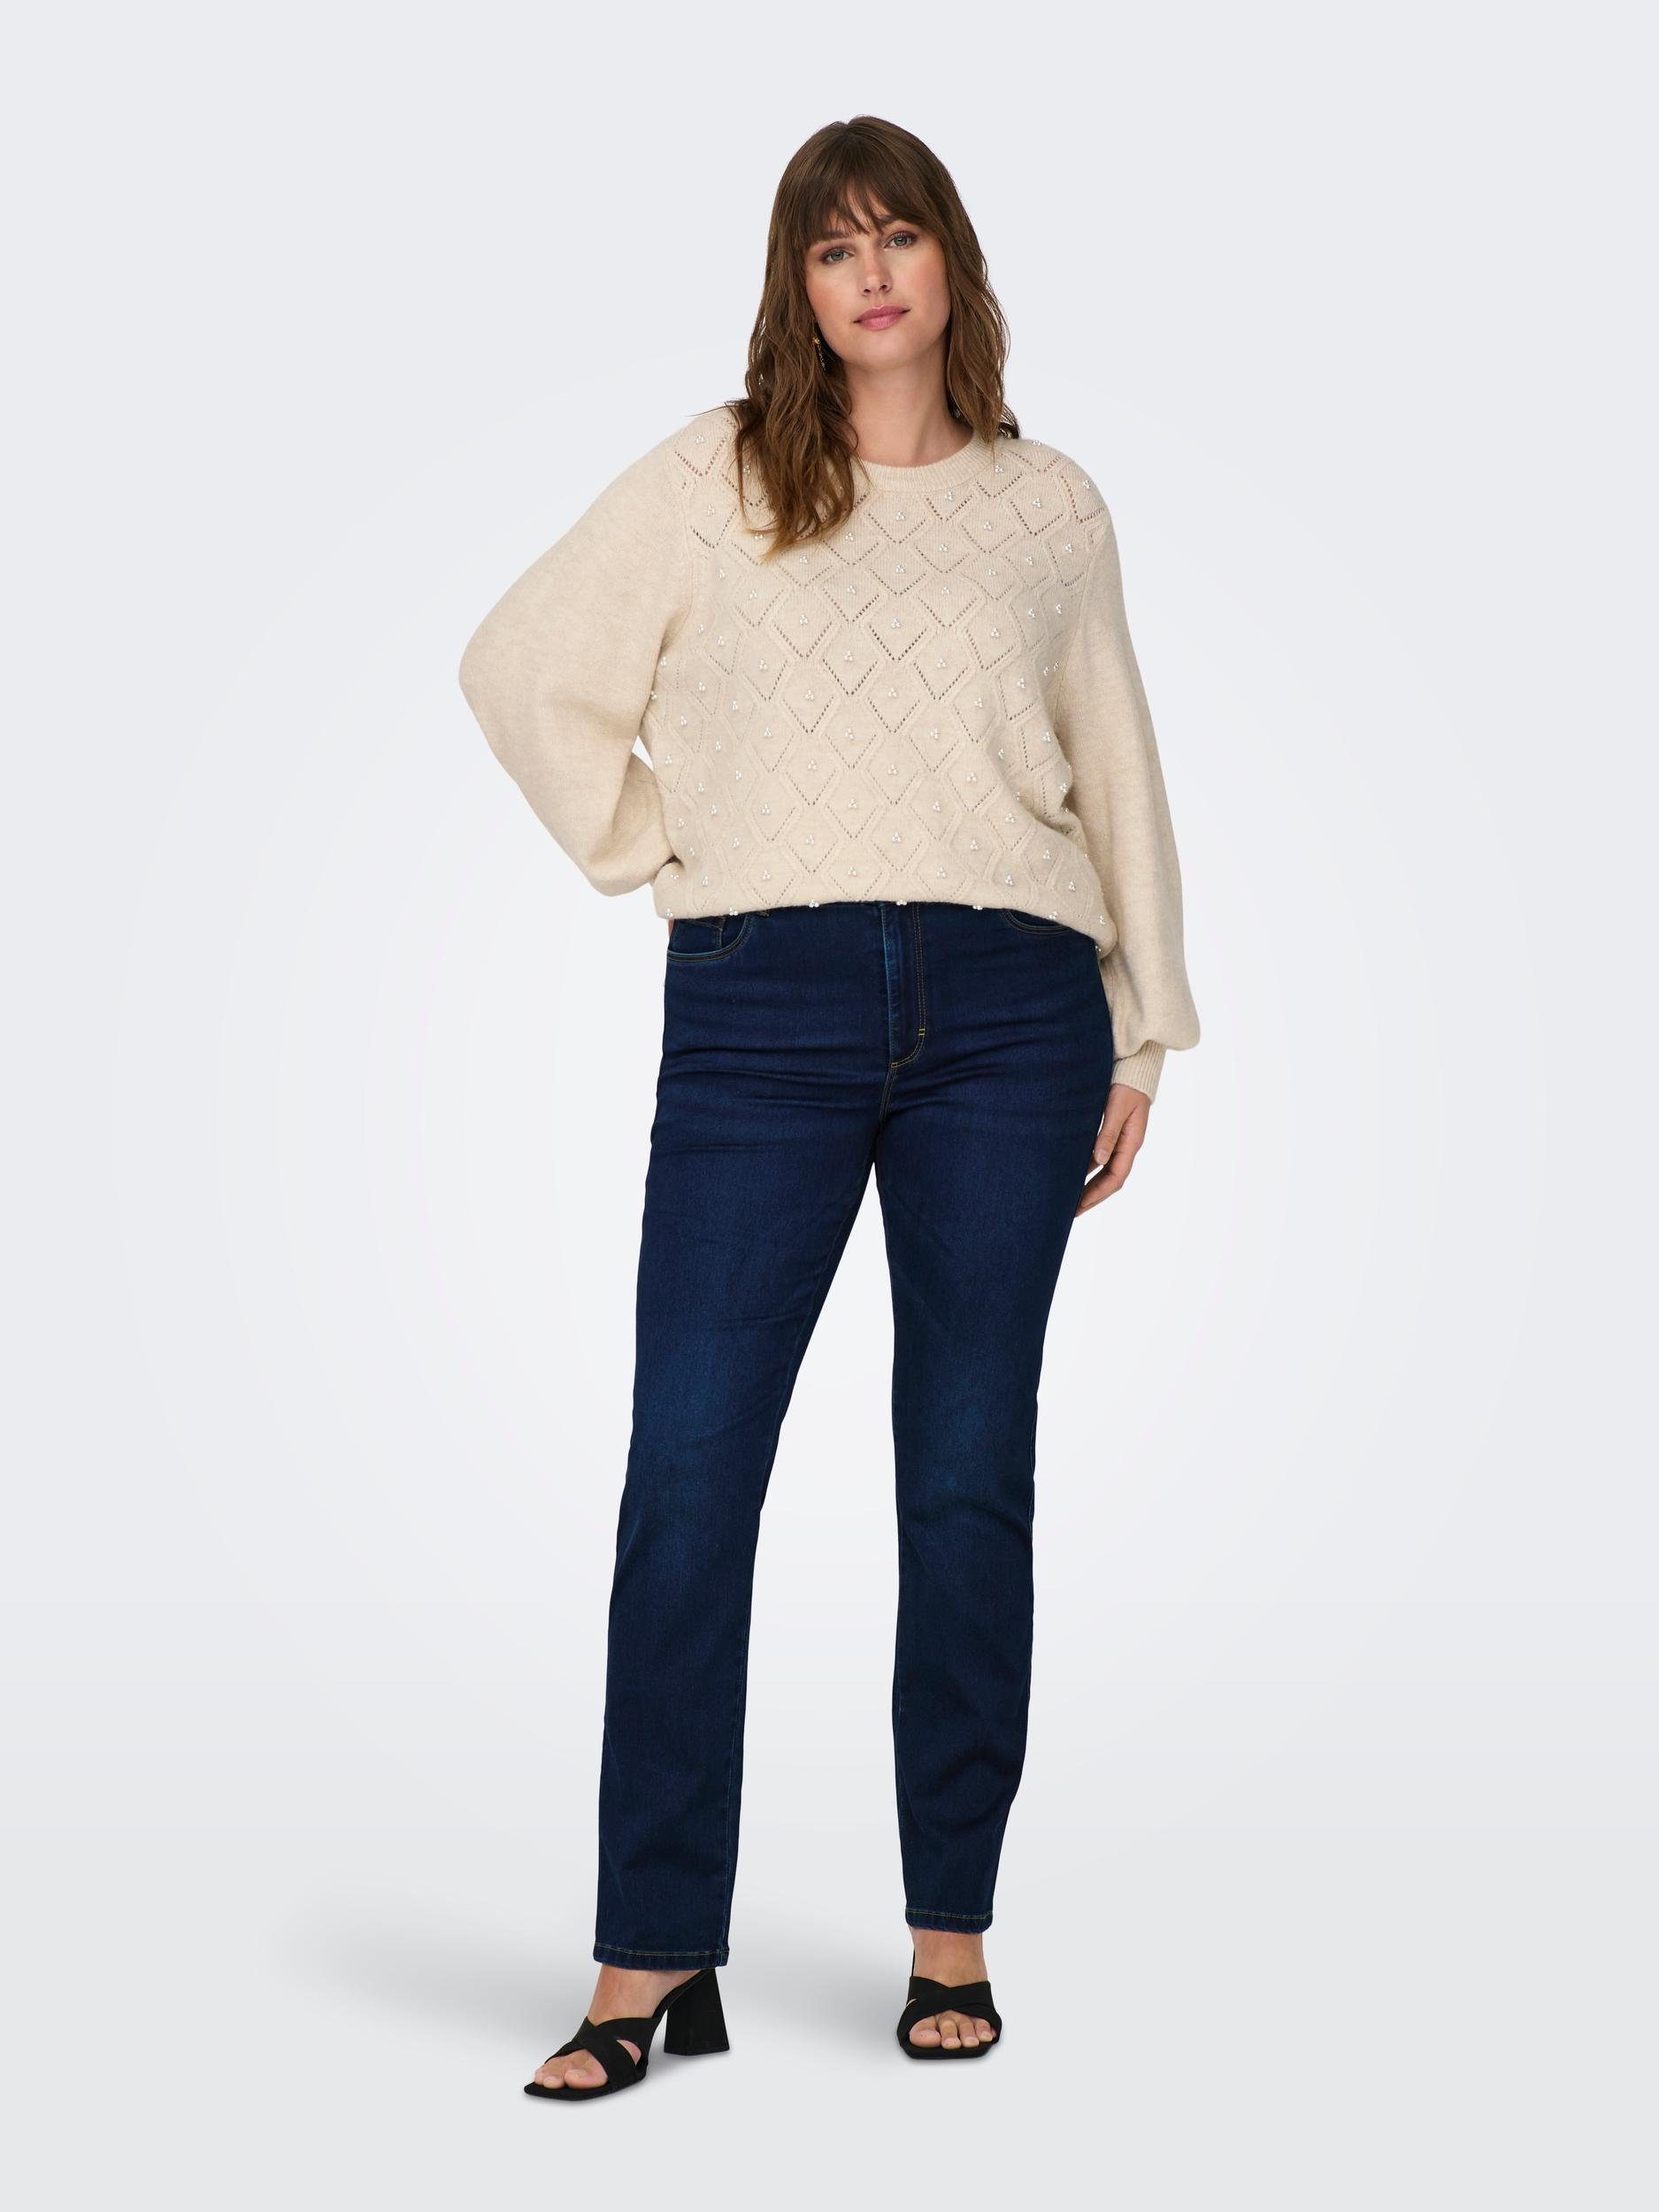 CARAUGUSTA jeans | ONLY CARMAKOMA STRAIGHT High-waist HW DNM online BJ61-2 NOOS shop OTTO